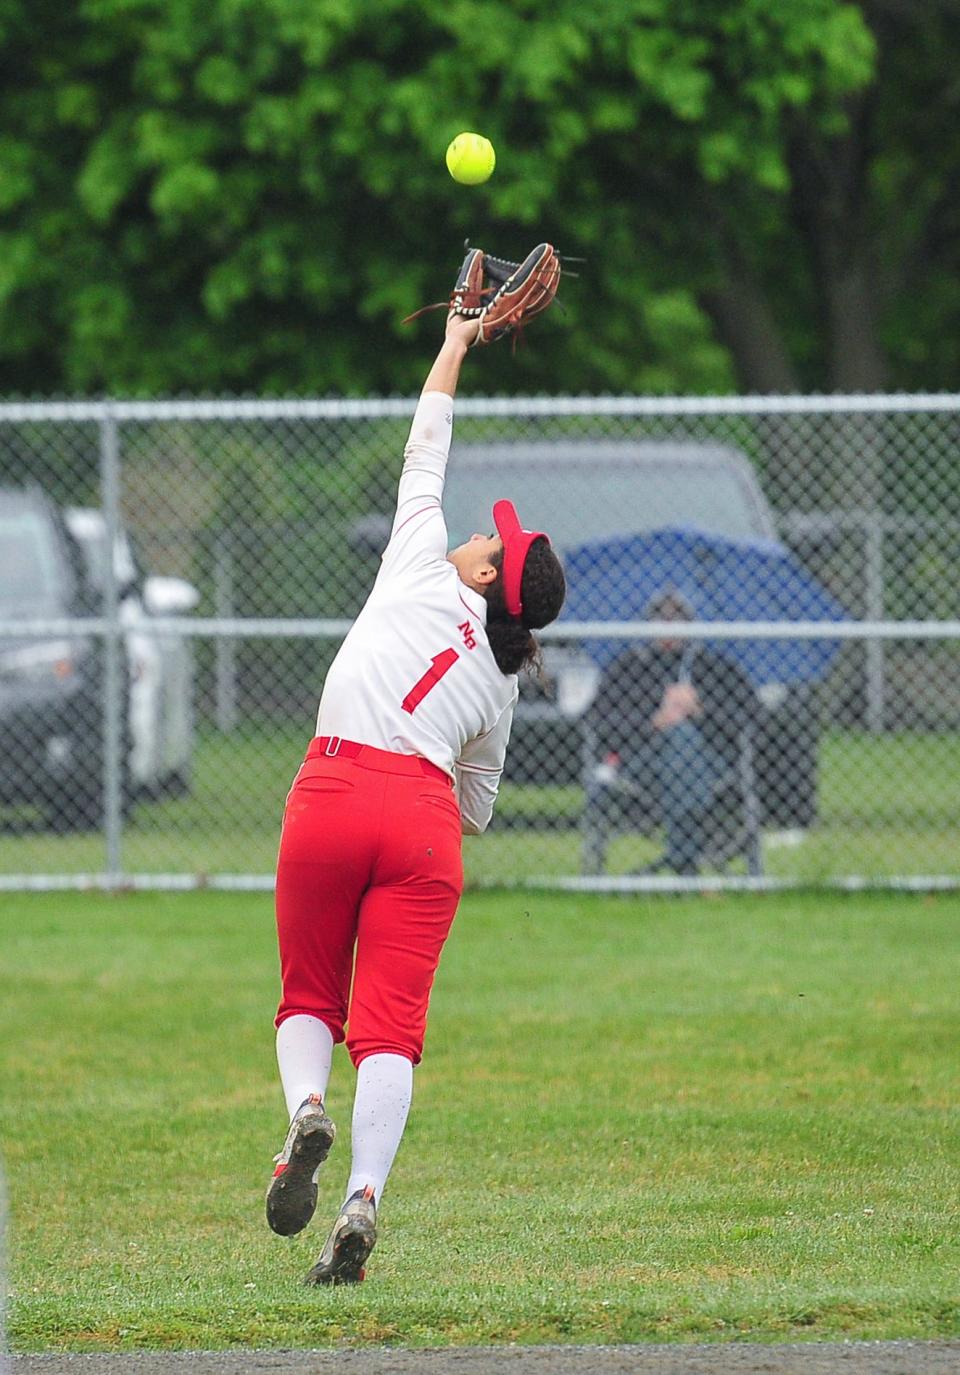 New Bedford’s Sydnee Ramos makes a catch during Thursday’s game against Case.